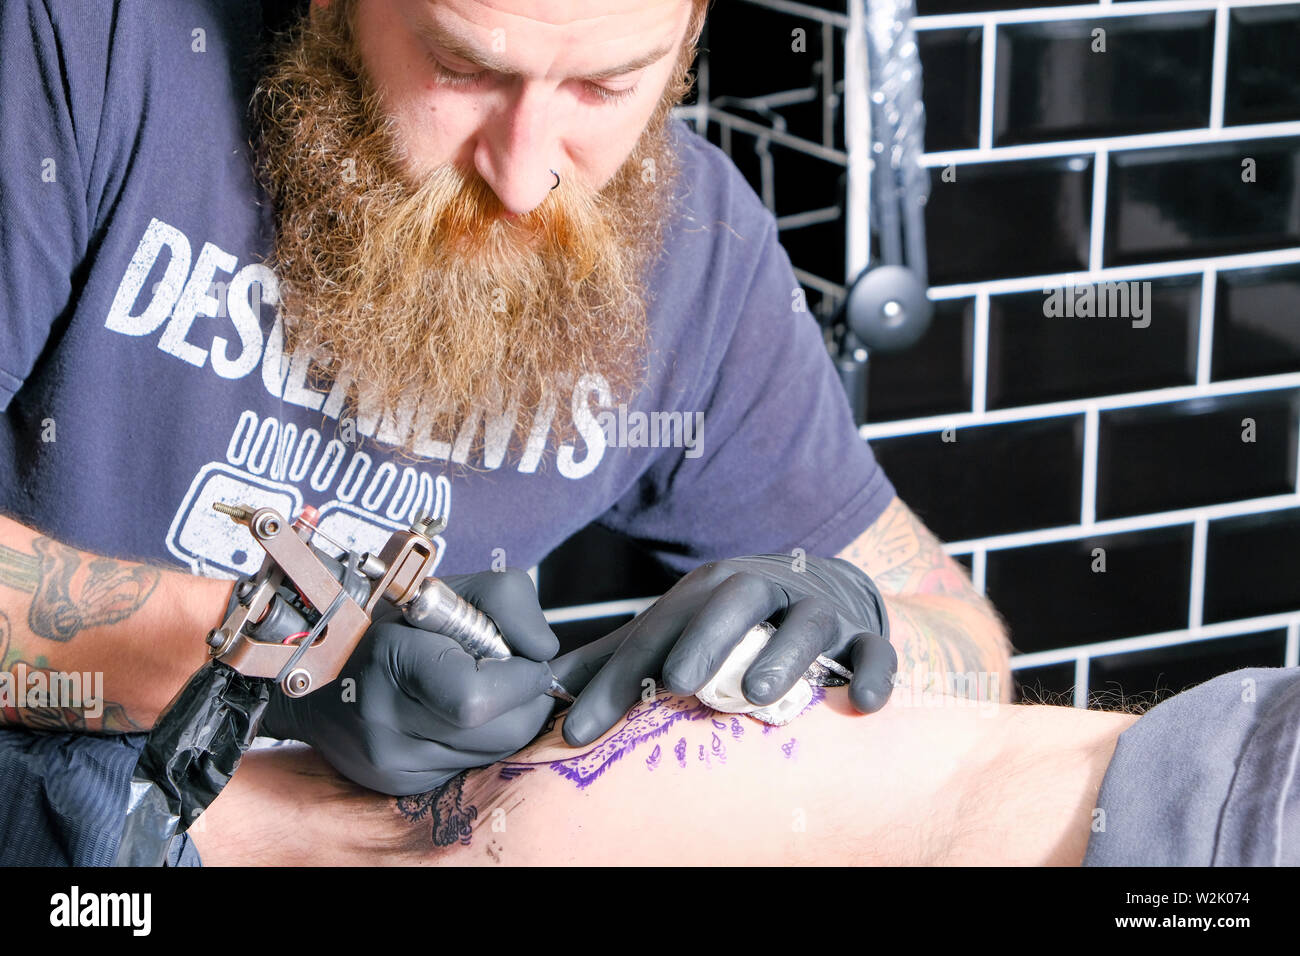 A Tattooist or tattoo artist works on a client creating a tattoo or piece of body art using an electric tattoo machine Stock Photo - Alamy